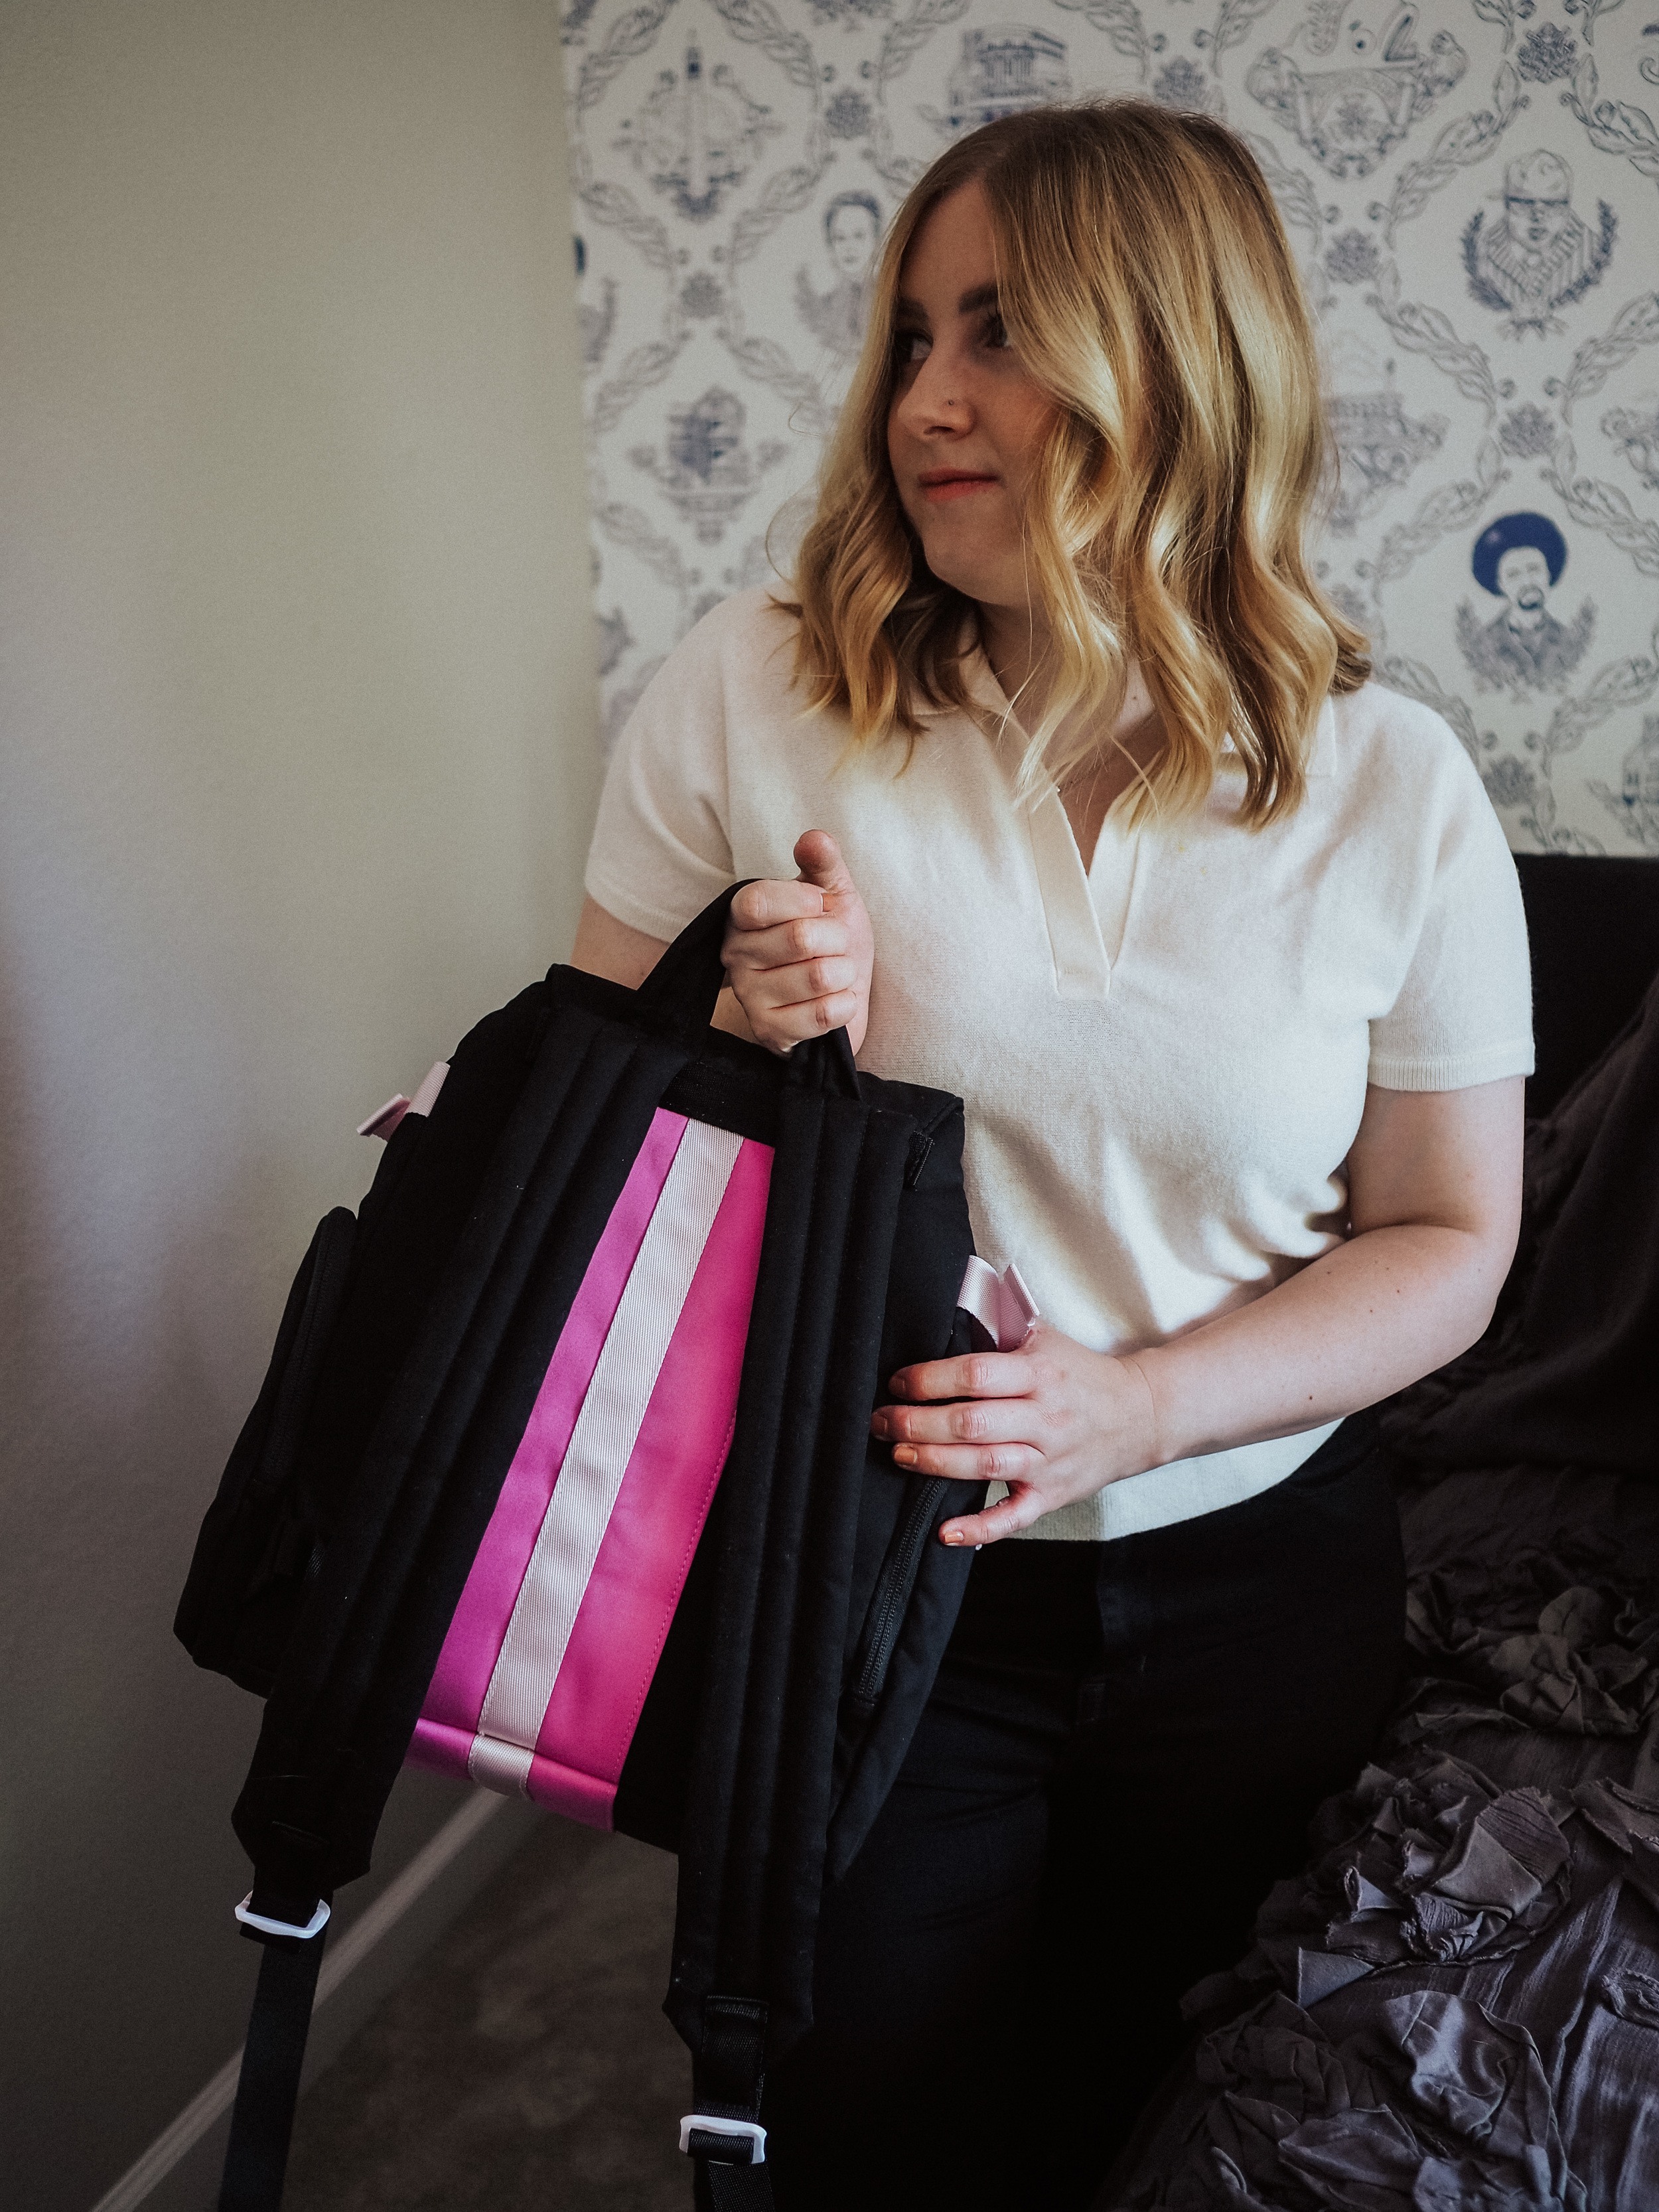 Kelsey from Blondes & Bagels reviews the best backpacks for women. These backpacks are comfortable, affordable, and durable.